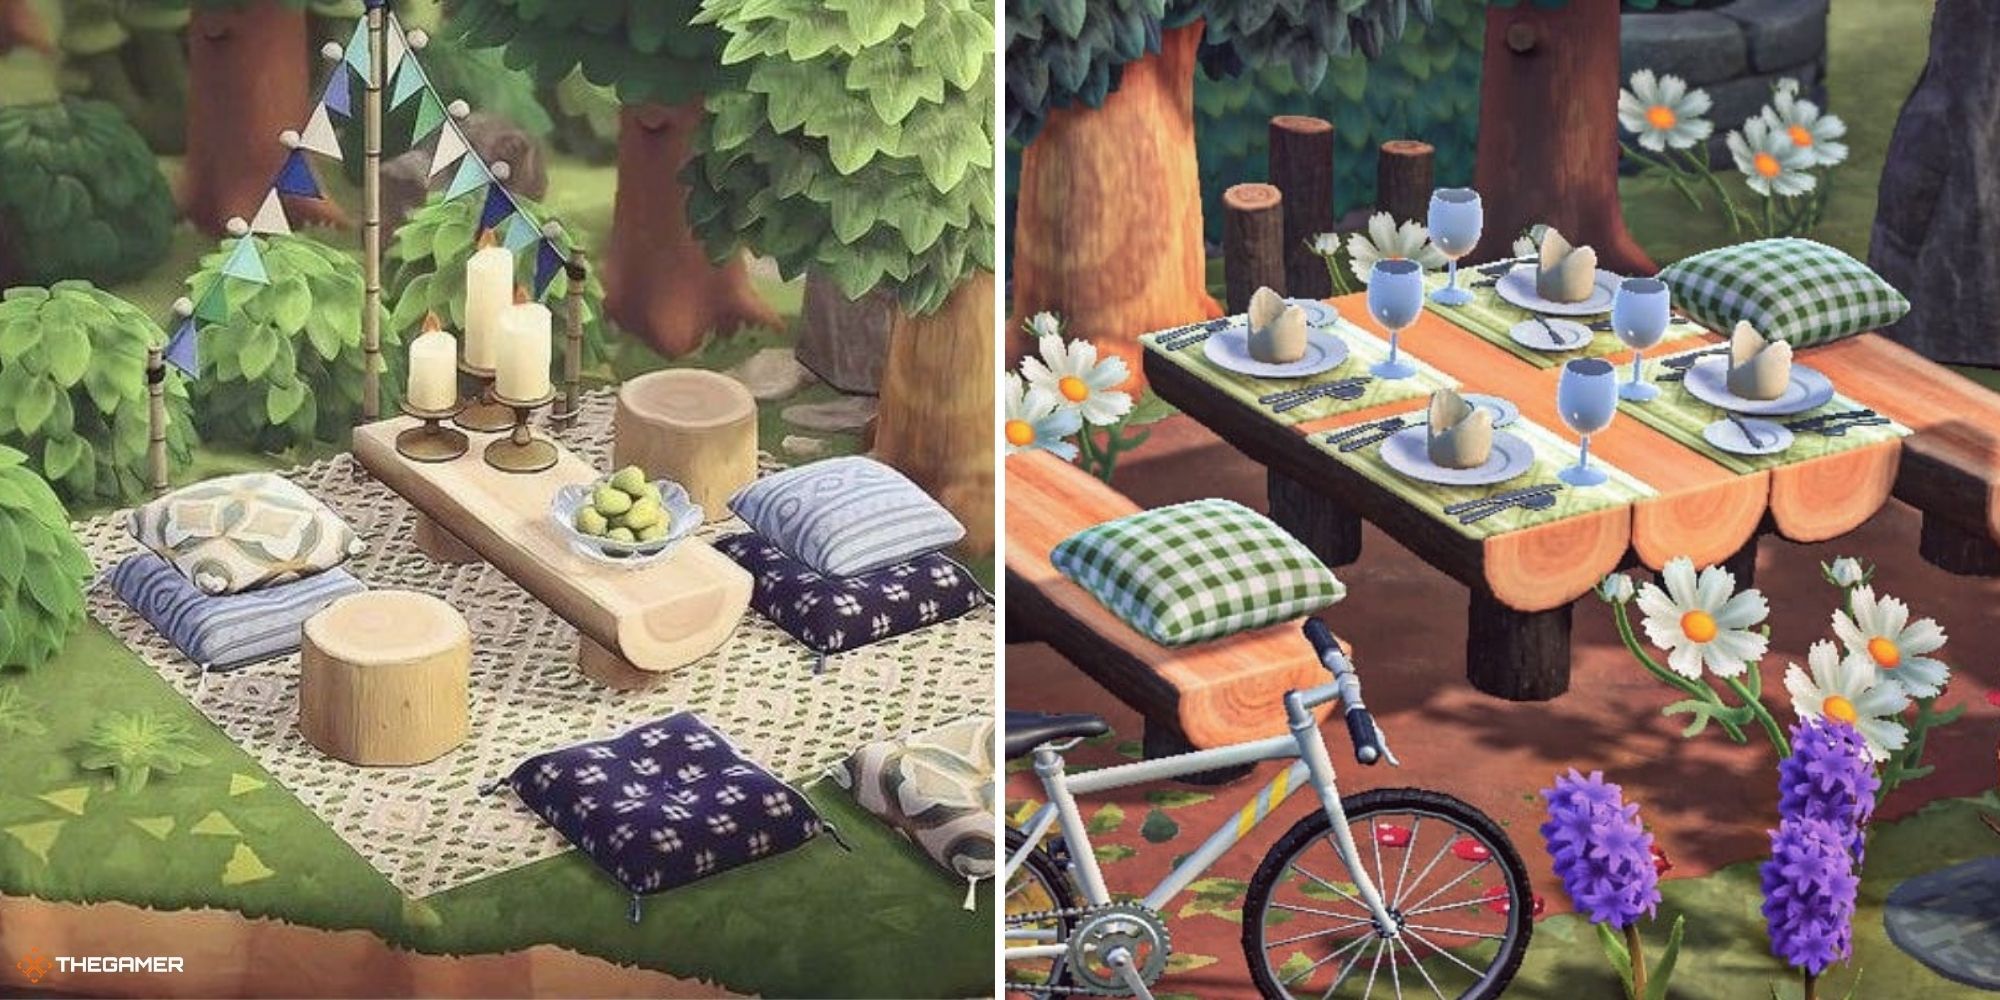 Animal Crossing New Horizons - Picnic Spots in the forest